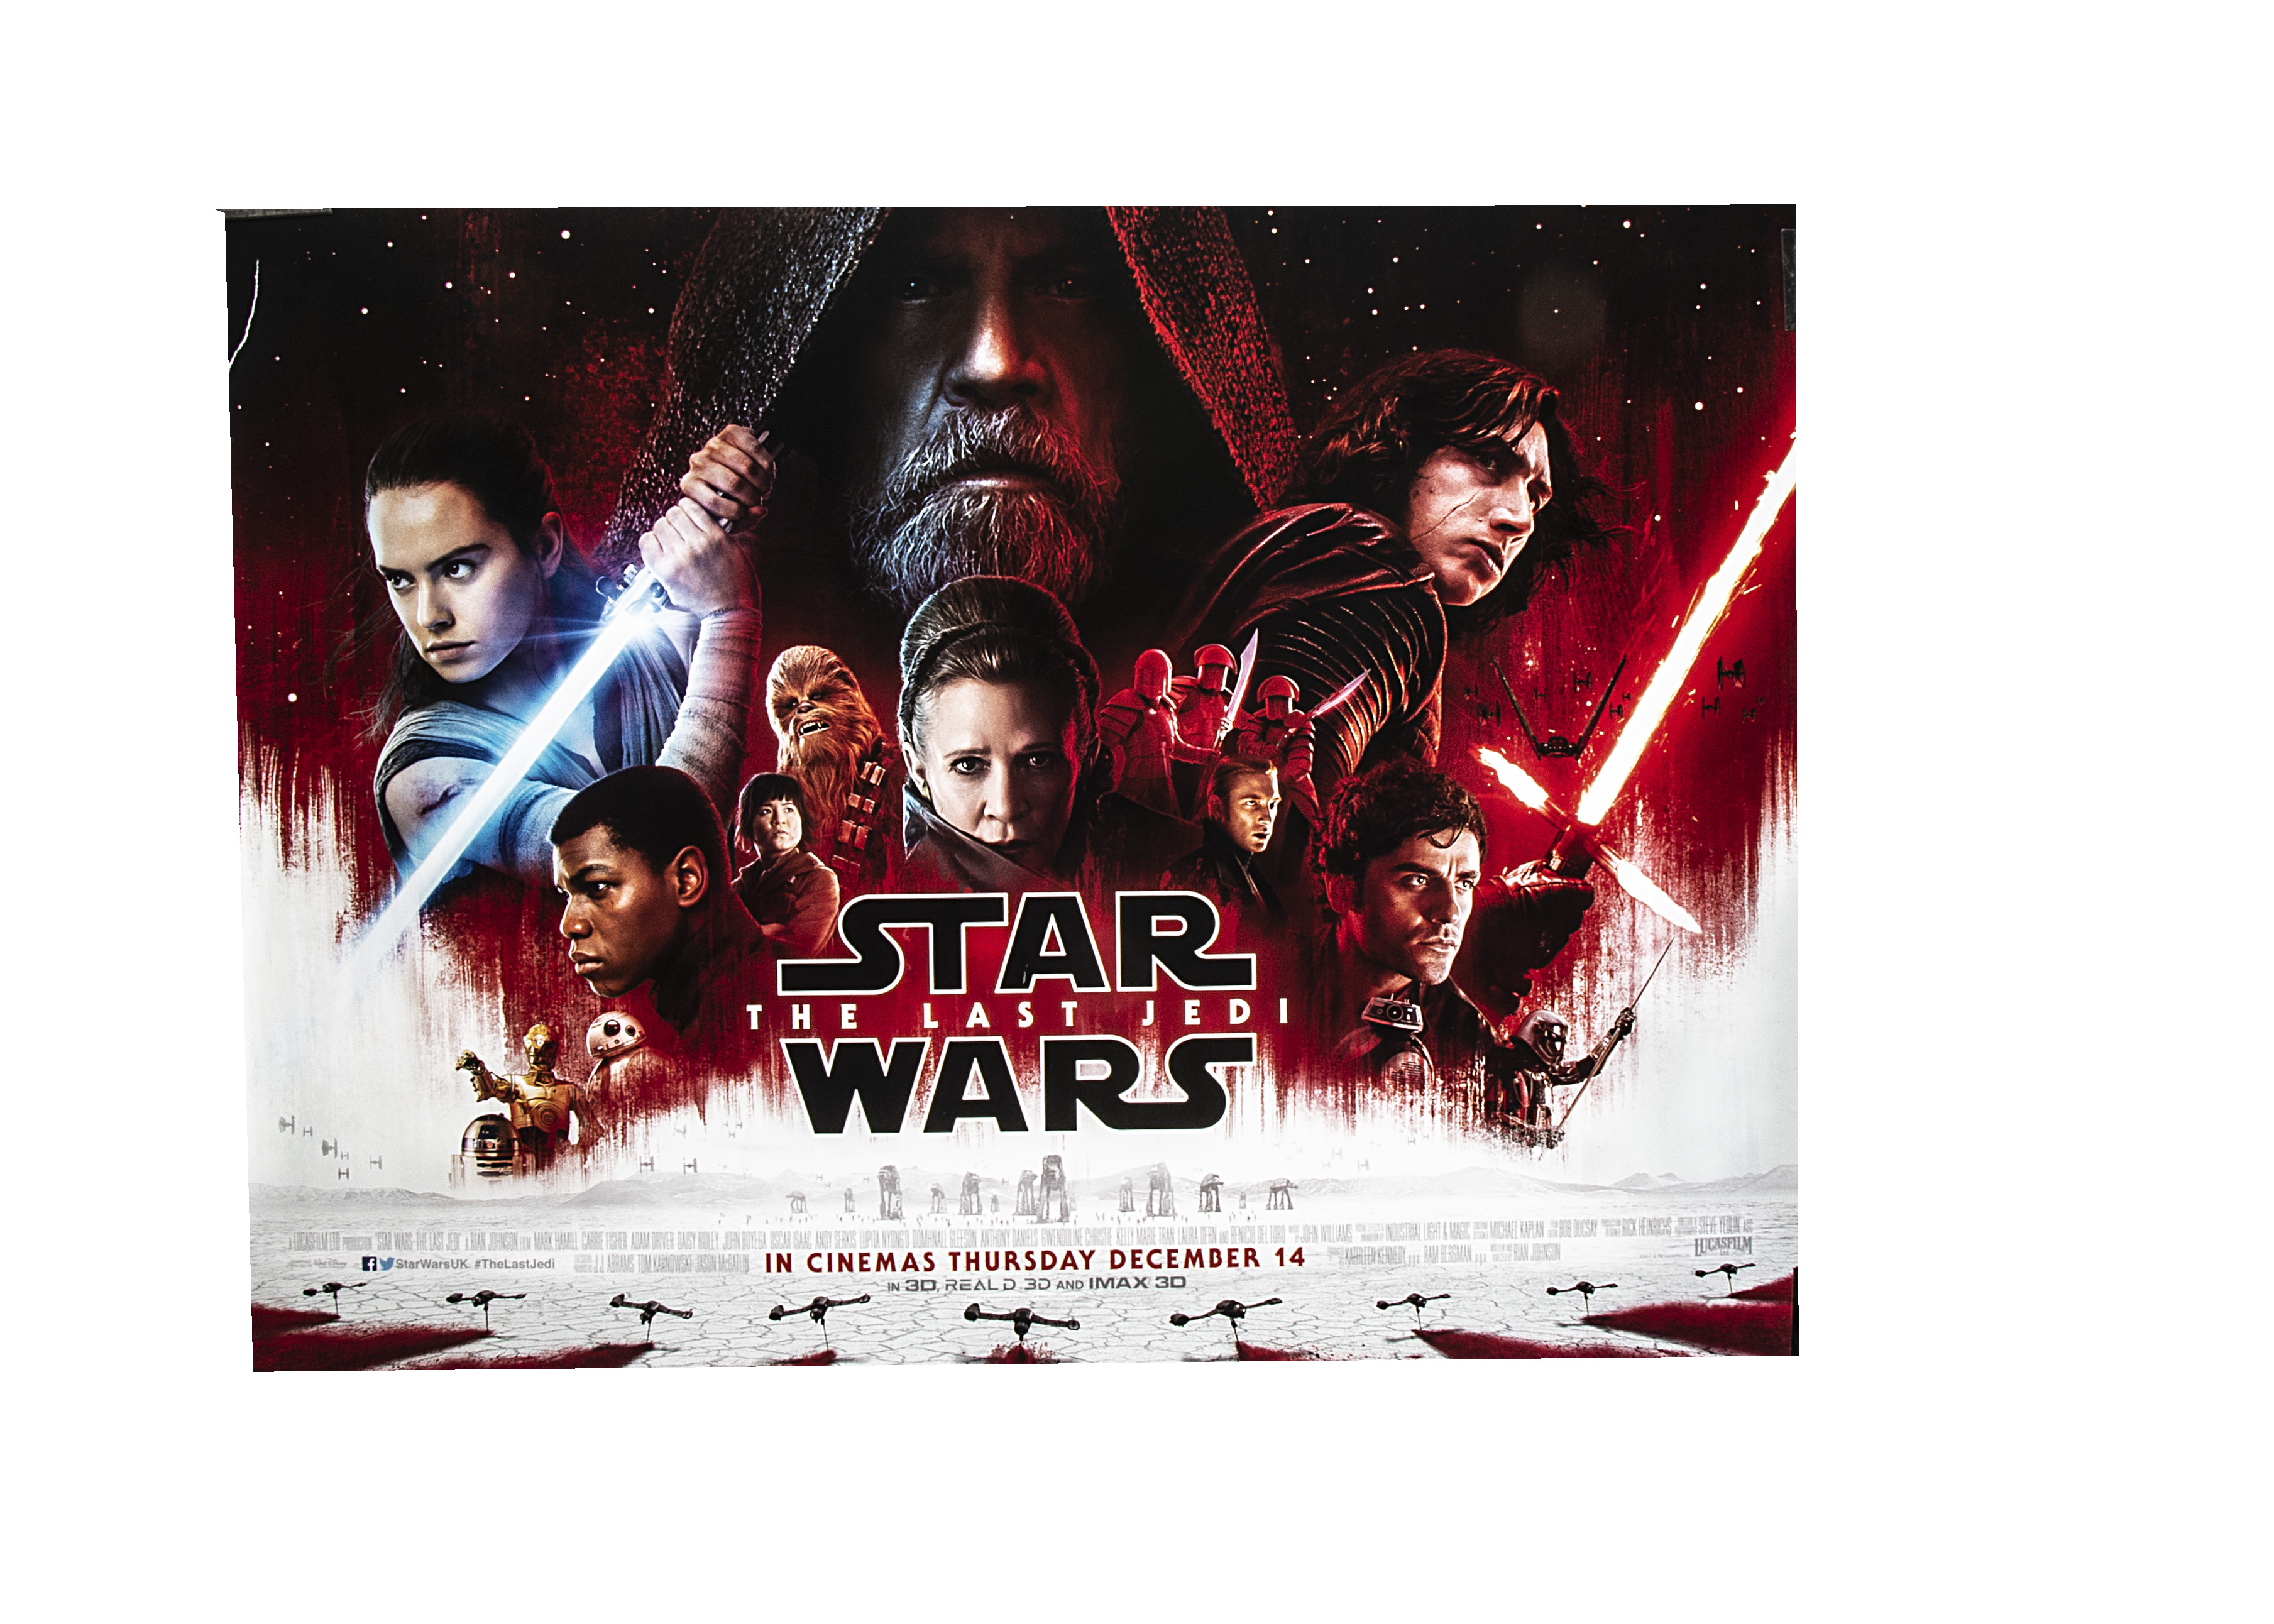 Star Wars Quad Posters, three Quads comprising The Last Jedi (double sided), The Phantom Menace (